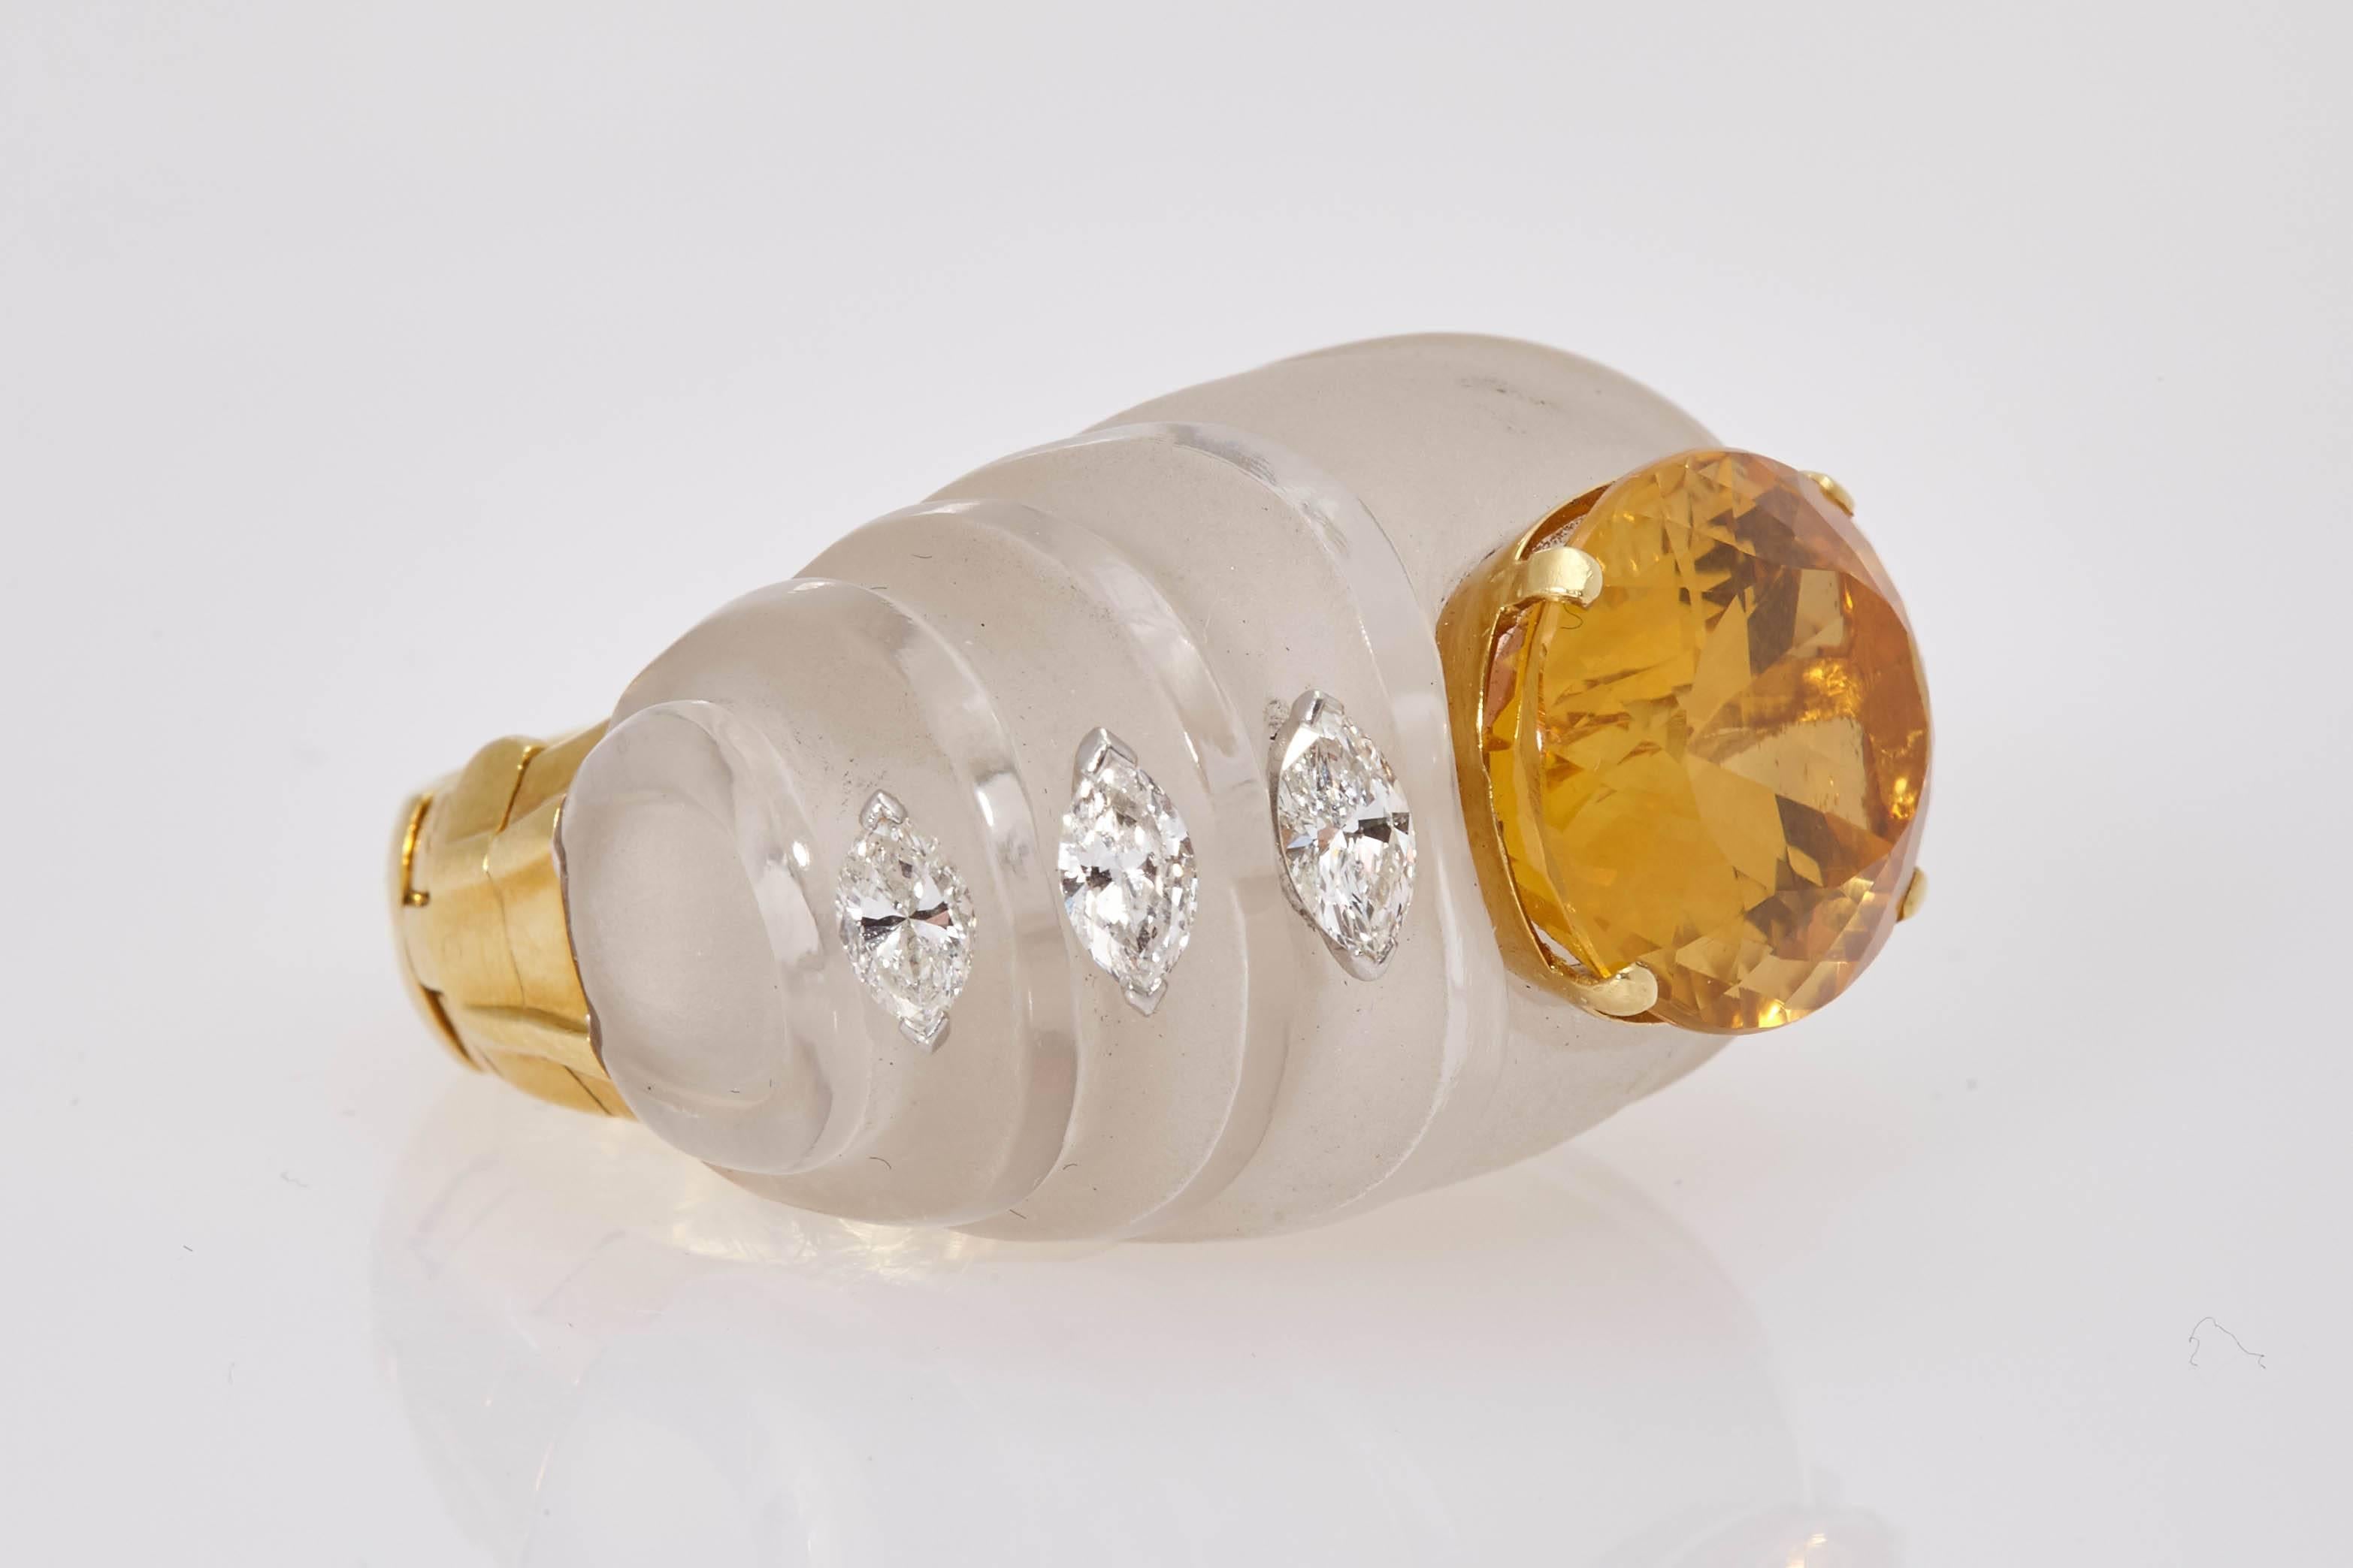 A large and impressive cocktail ring, the body made out of carved rock crystal, showcasing an oval citrine, highlighted by marquise cut diamonds, mounted on 18kt yellow gold. Made in the USA, circa 1970s. 